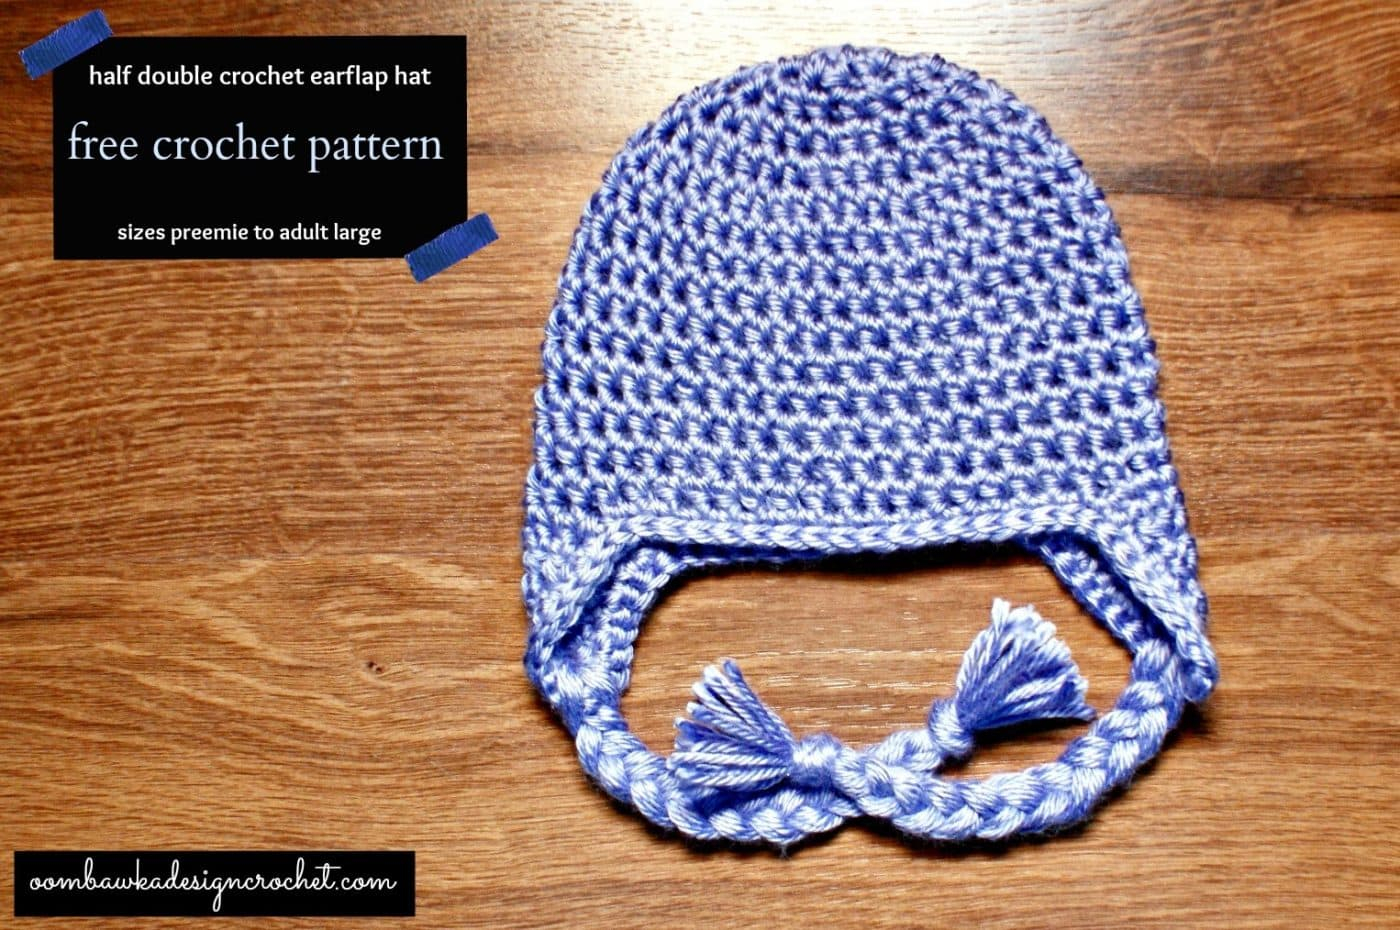 Crochet Hat With Ears Pattern Keep Your Ears Covered This Winter With This Simple Earflap Hat